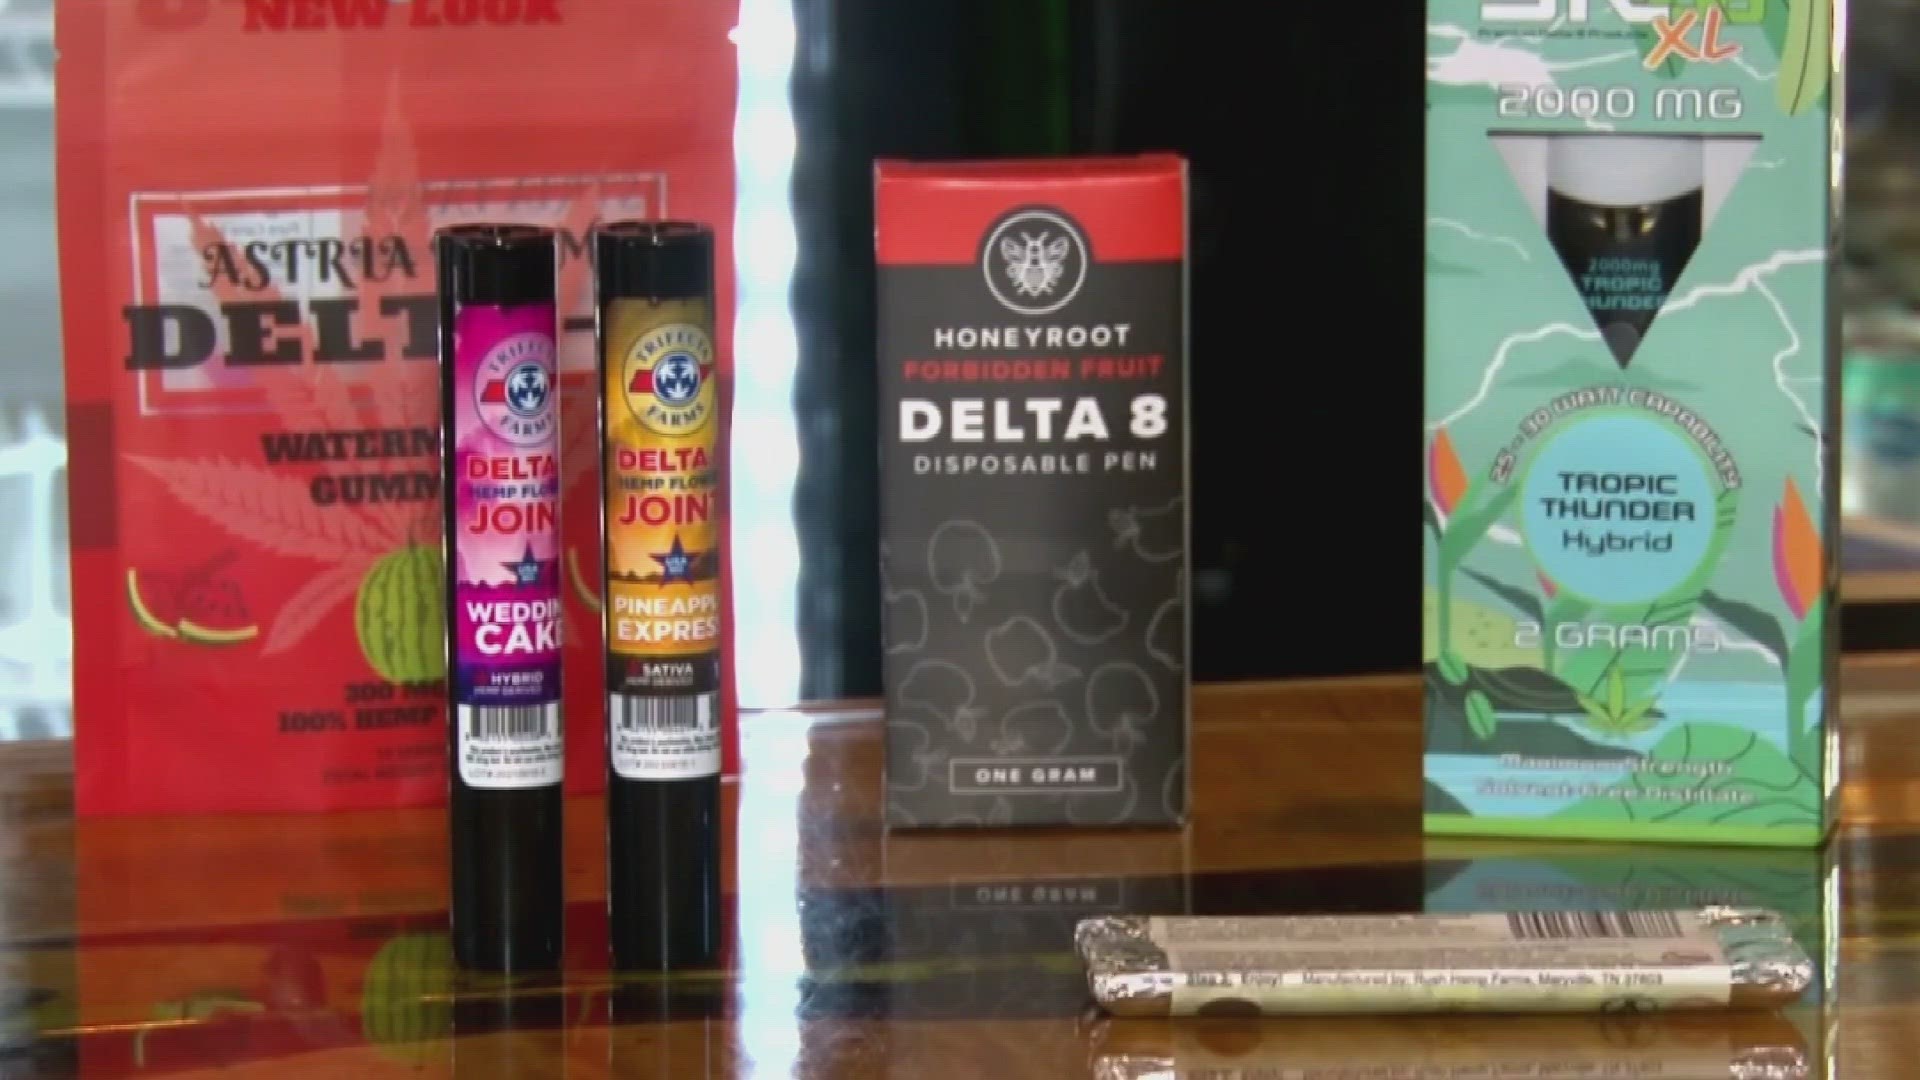 The Tennessee Poison Center said it's seeing a rise in medical calls about delta-8 products.